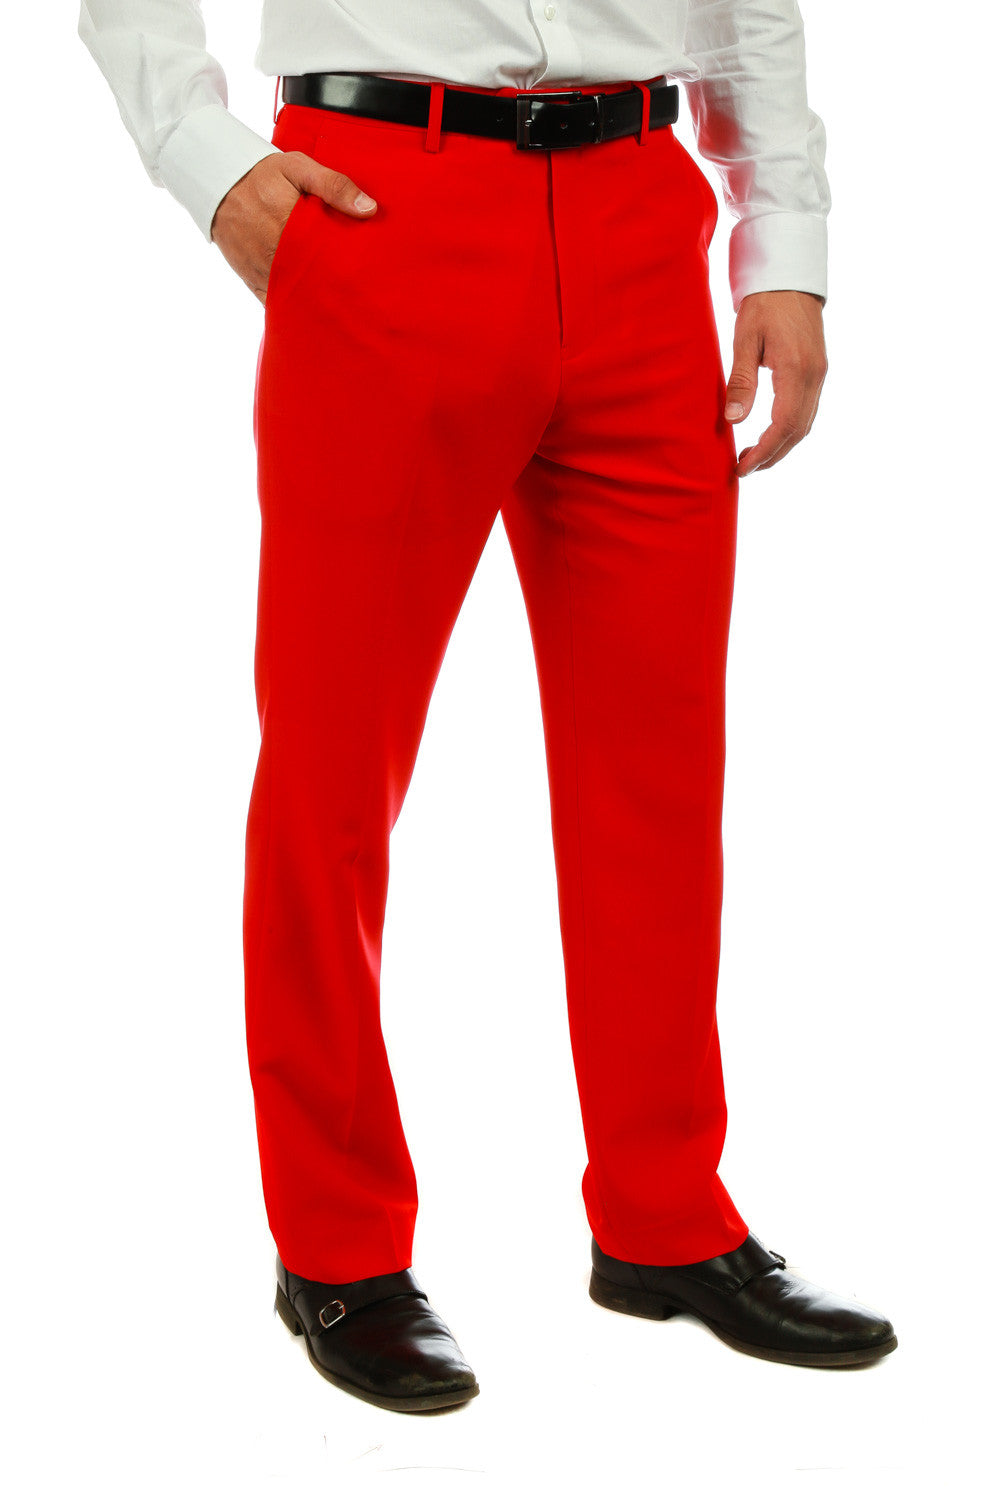 Buy Natural Mens Linen Pants, Red Pants, Lounge Pants, Linen Joggers, Mens  Trousers, Flax Pants, Summer Pants, Yoga Pants, Sustainable Fashion Online  in India - Etsy